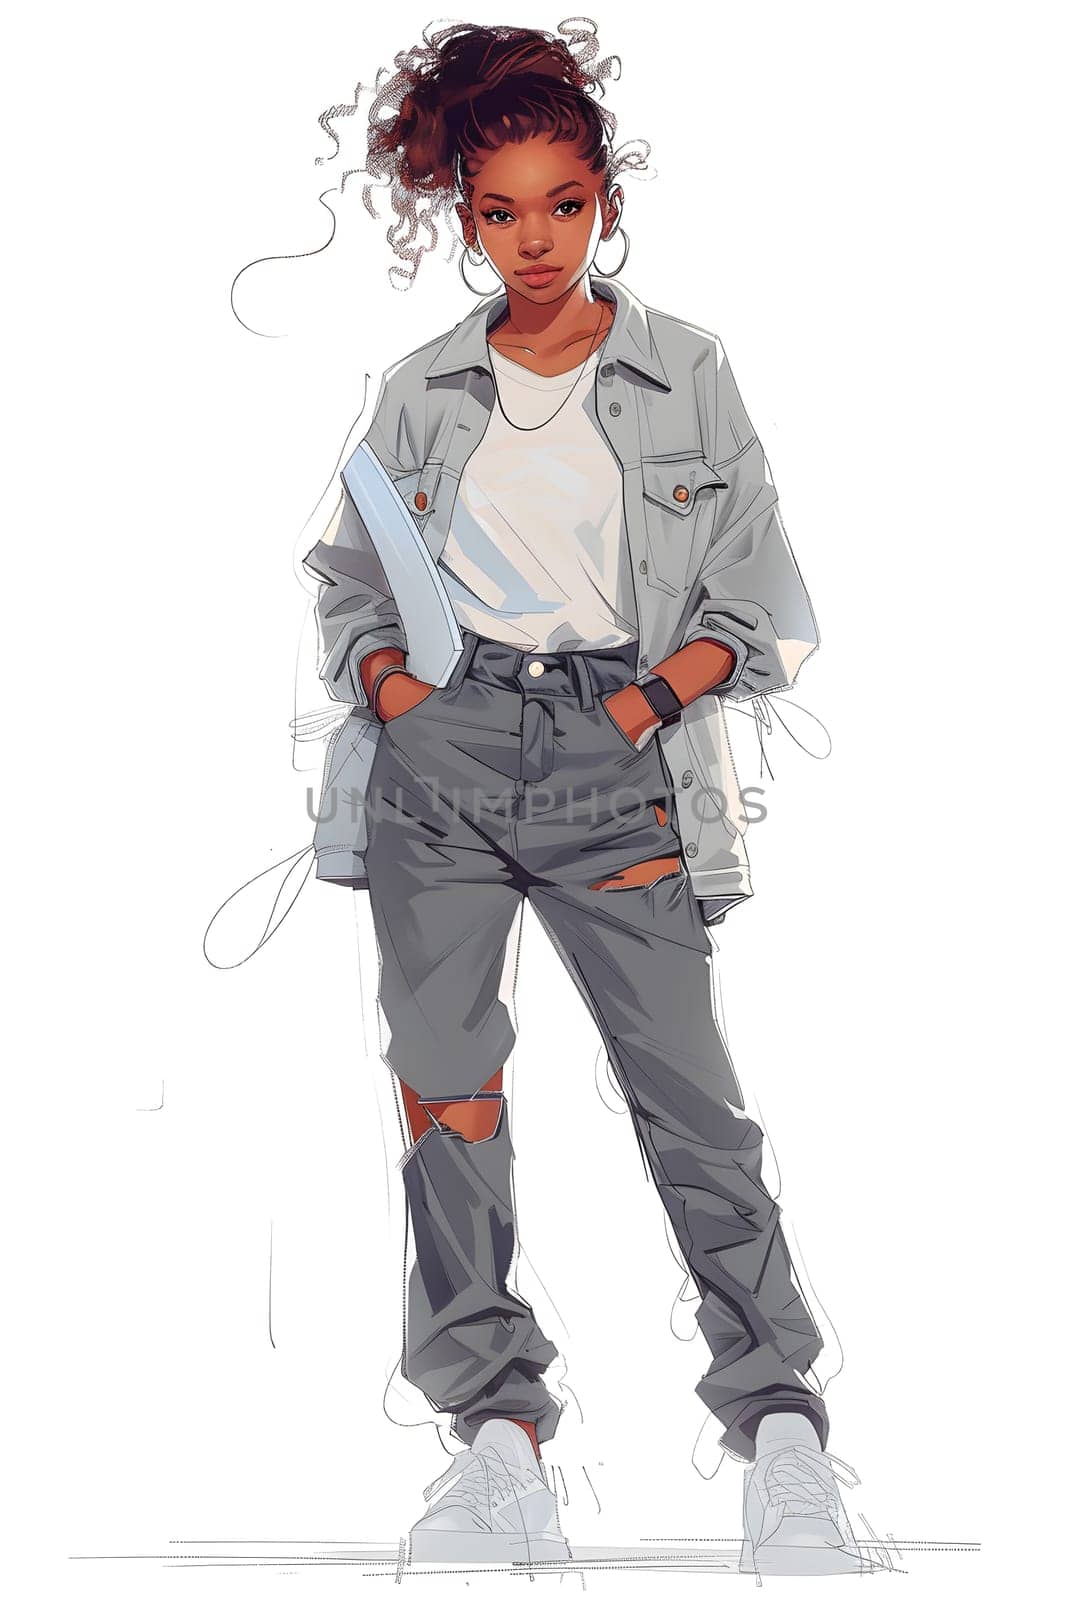 The woman in a denim jacket and ripped jeans stands with her hands in her pockets, showcasing a casual yet stylish look with a touch of edgy fashion design